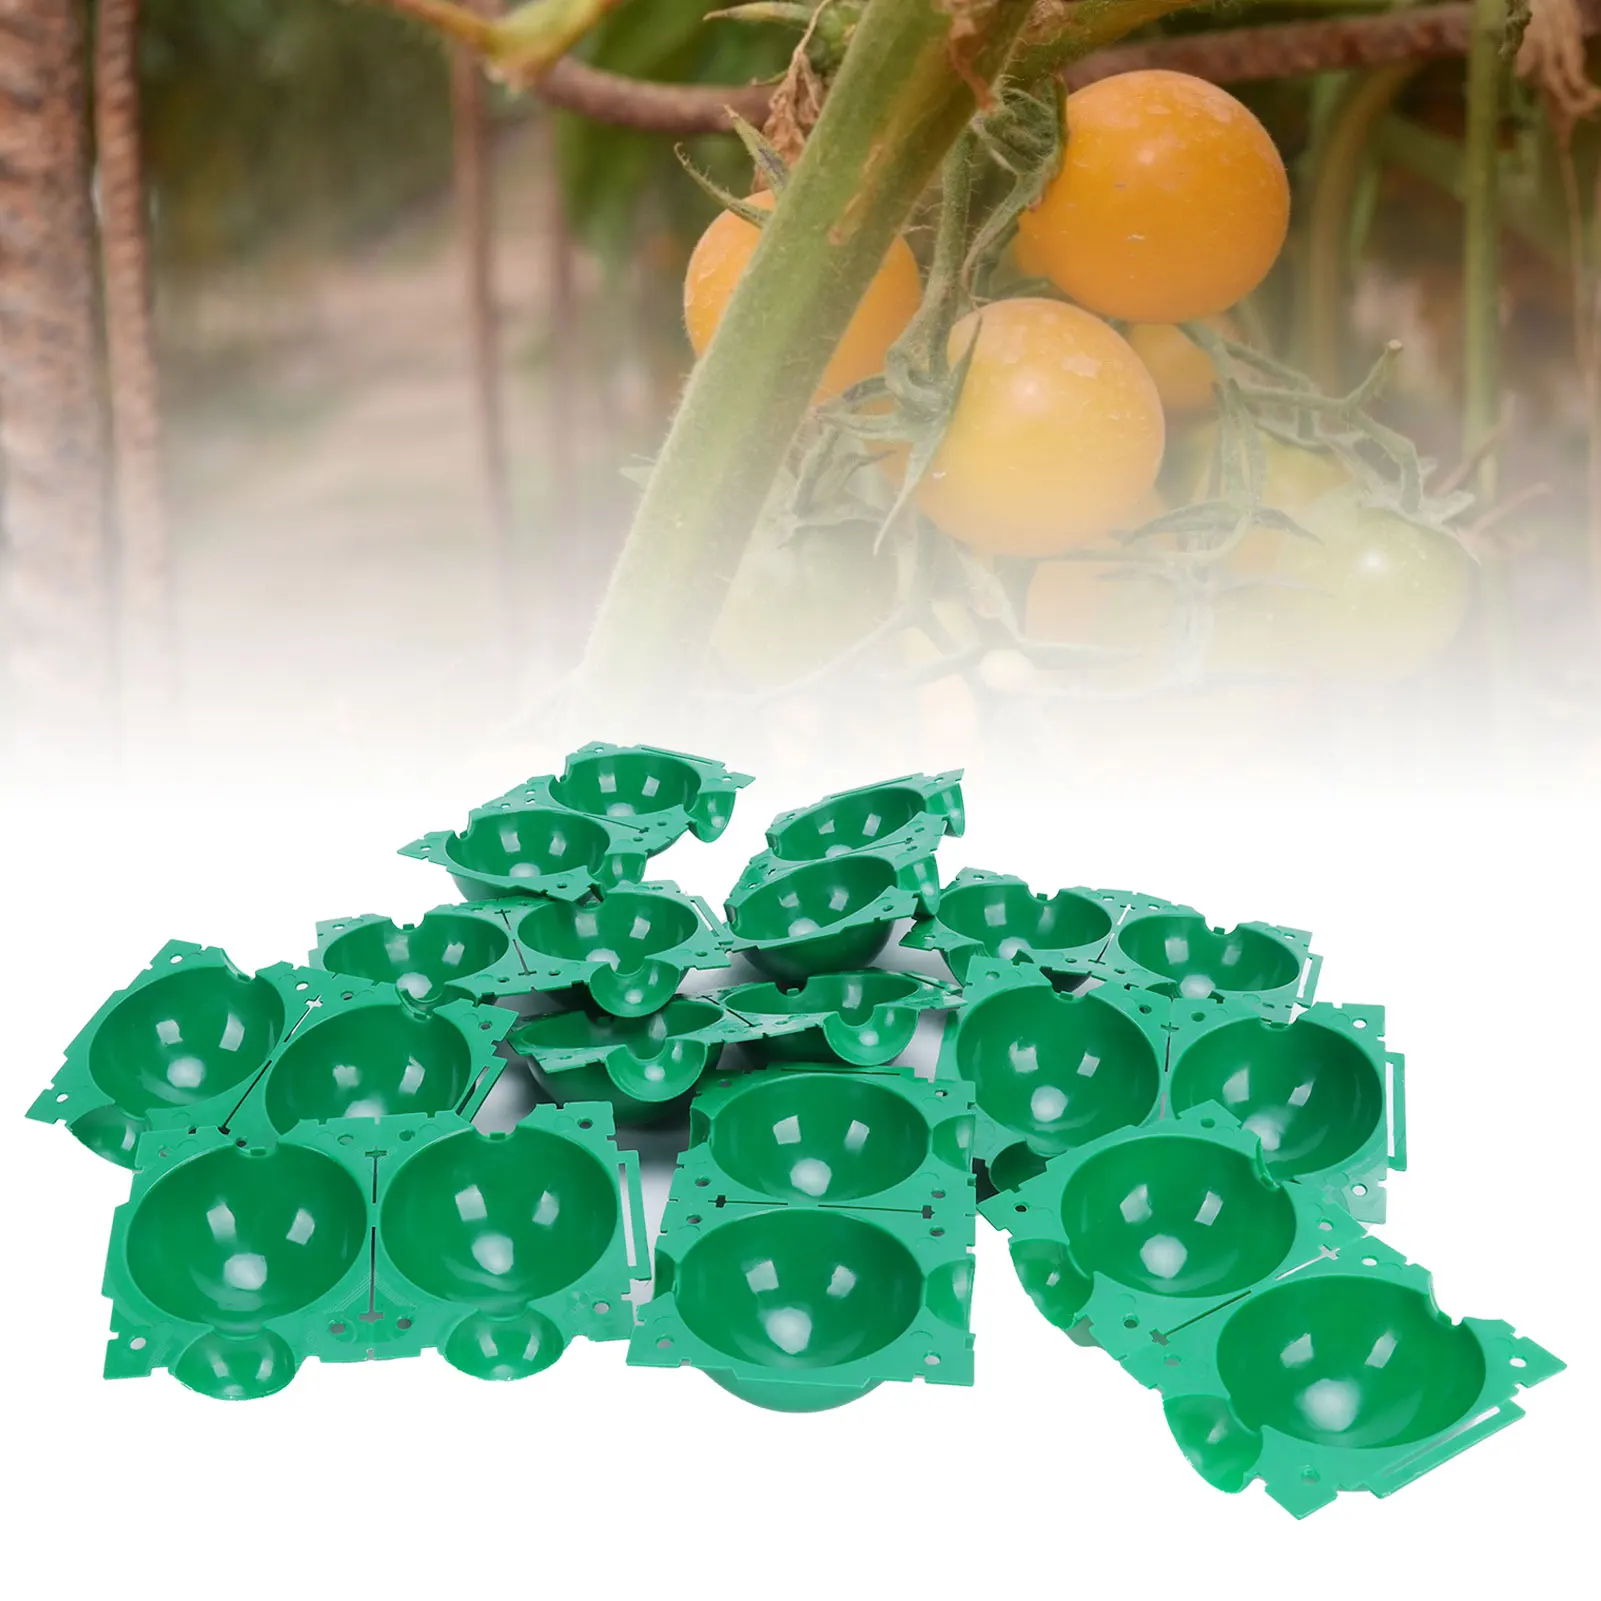 10pcs Reusable Plant Rooting Ball Plant Propagation Device High Pressure Root Growing Ball Box Plant Grafting Pots Green 3pcs plant rooting equipment high pressure propagation ball growing box breeding case for garden graft box sapling 2021 new